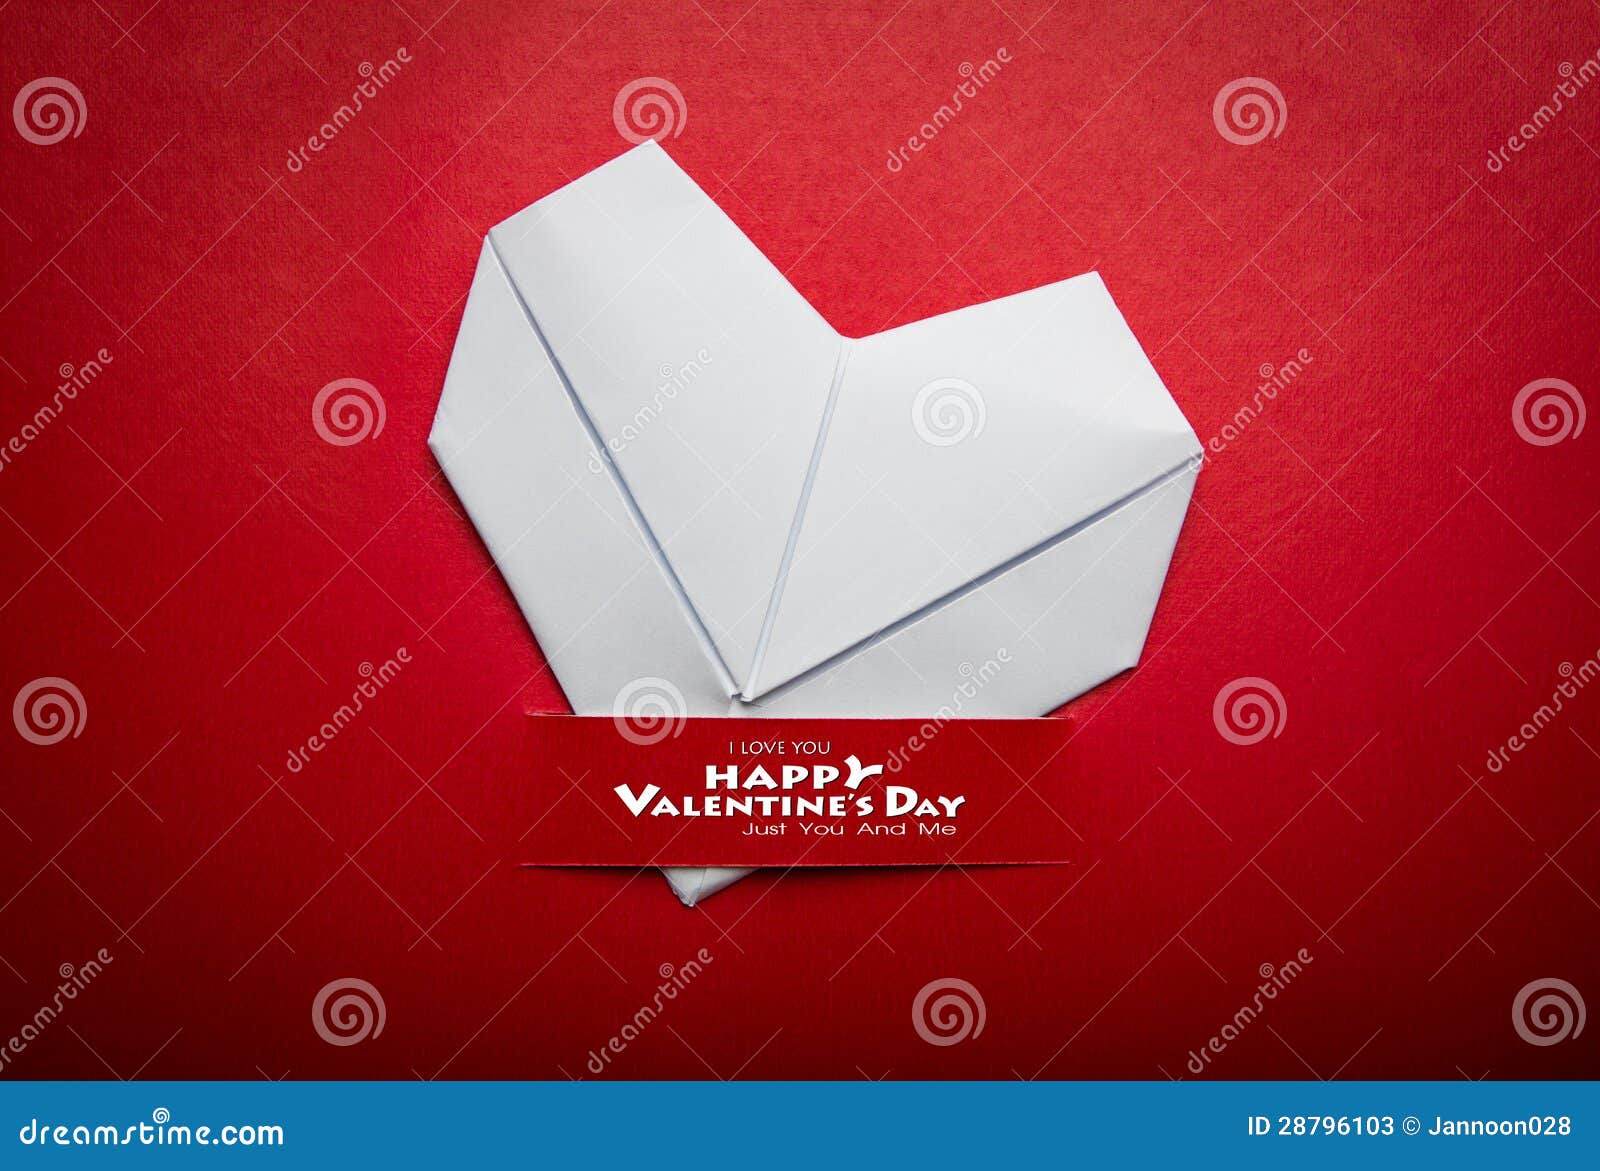 Origami paper heart shape symbol for Valentines day with copy space ...